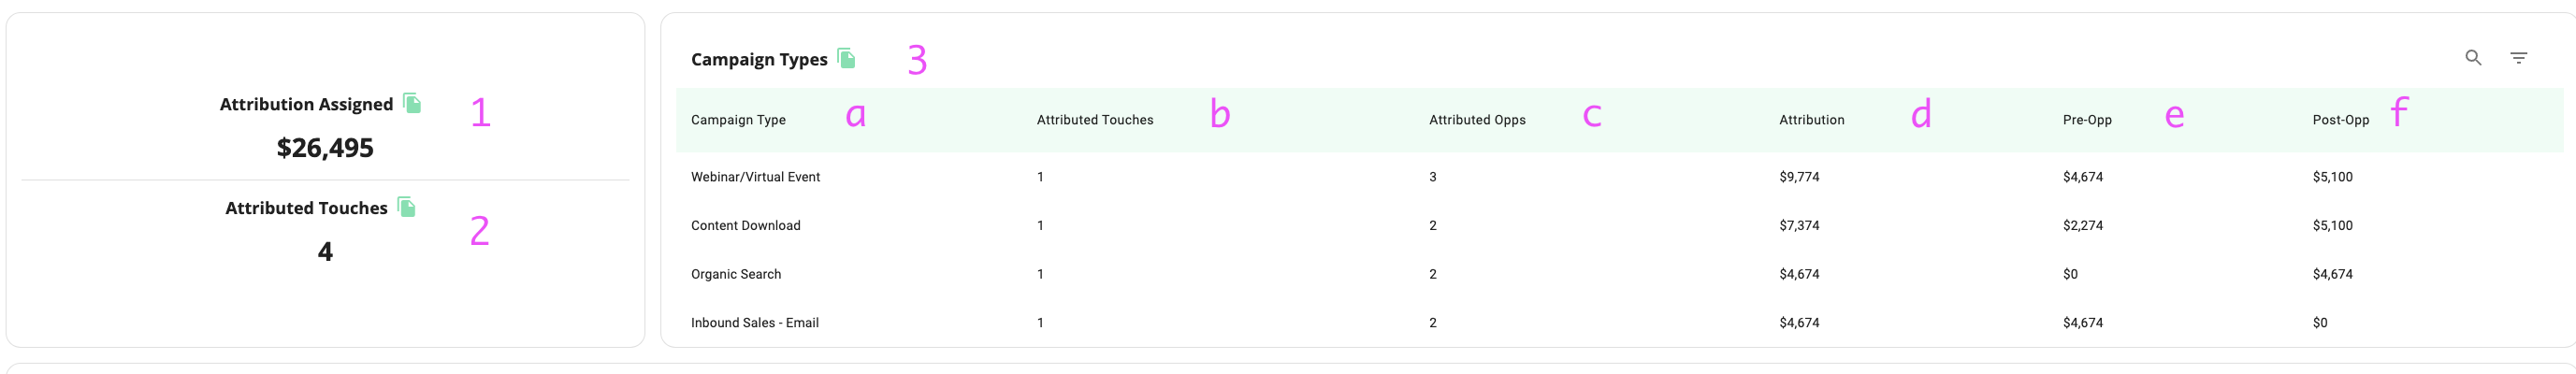 attribution metrics for person search